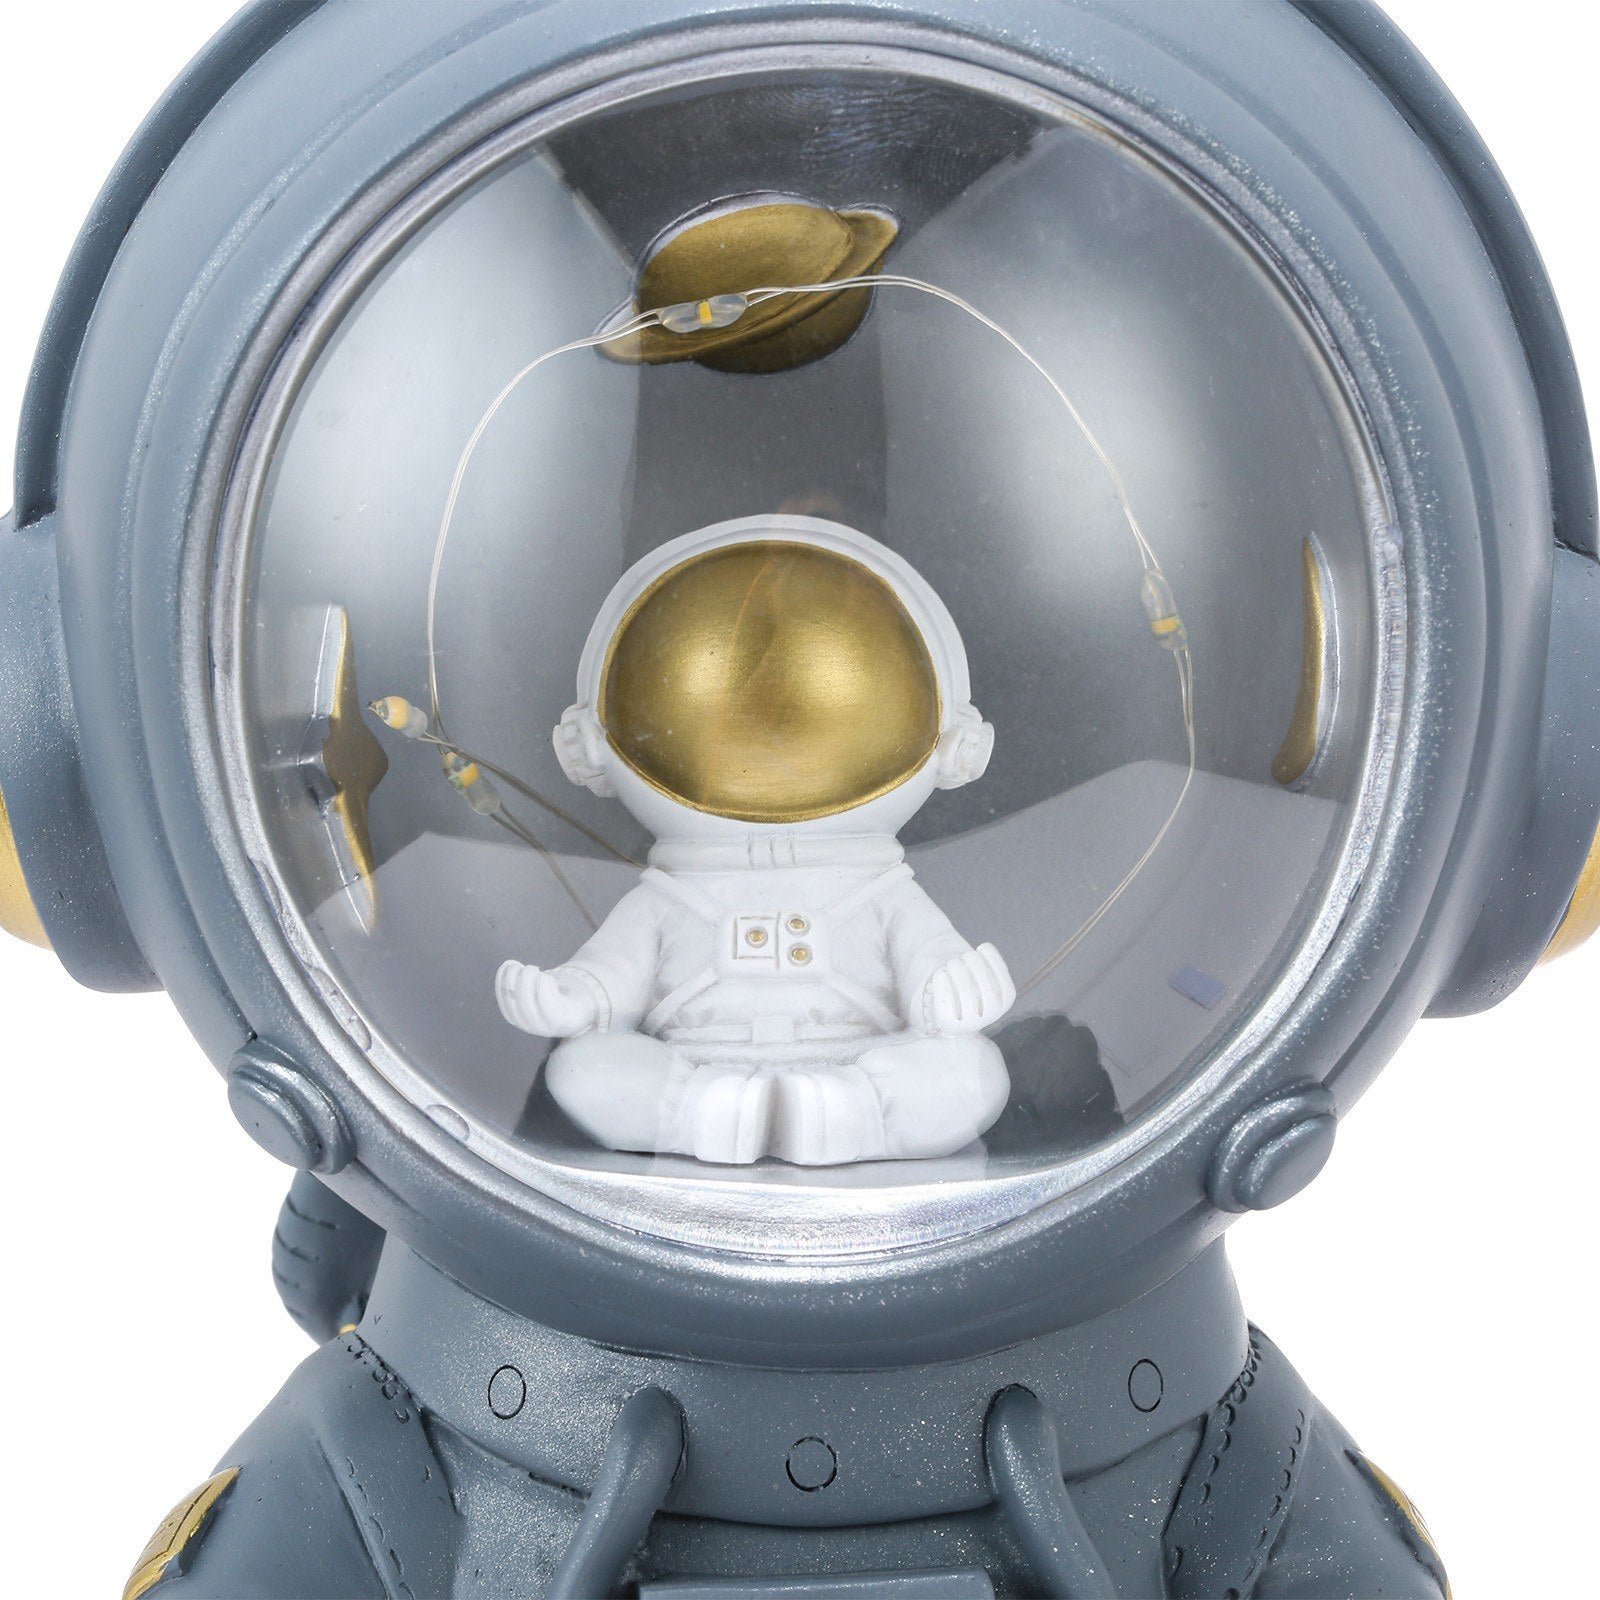 Get this collectible astronaut figurine to celebrate the courageous men and women who have always wanted to explore space